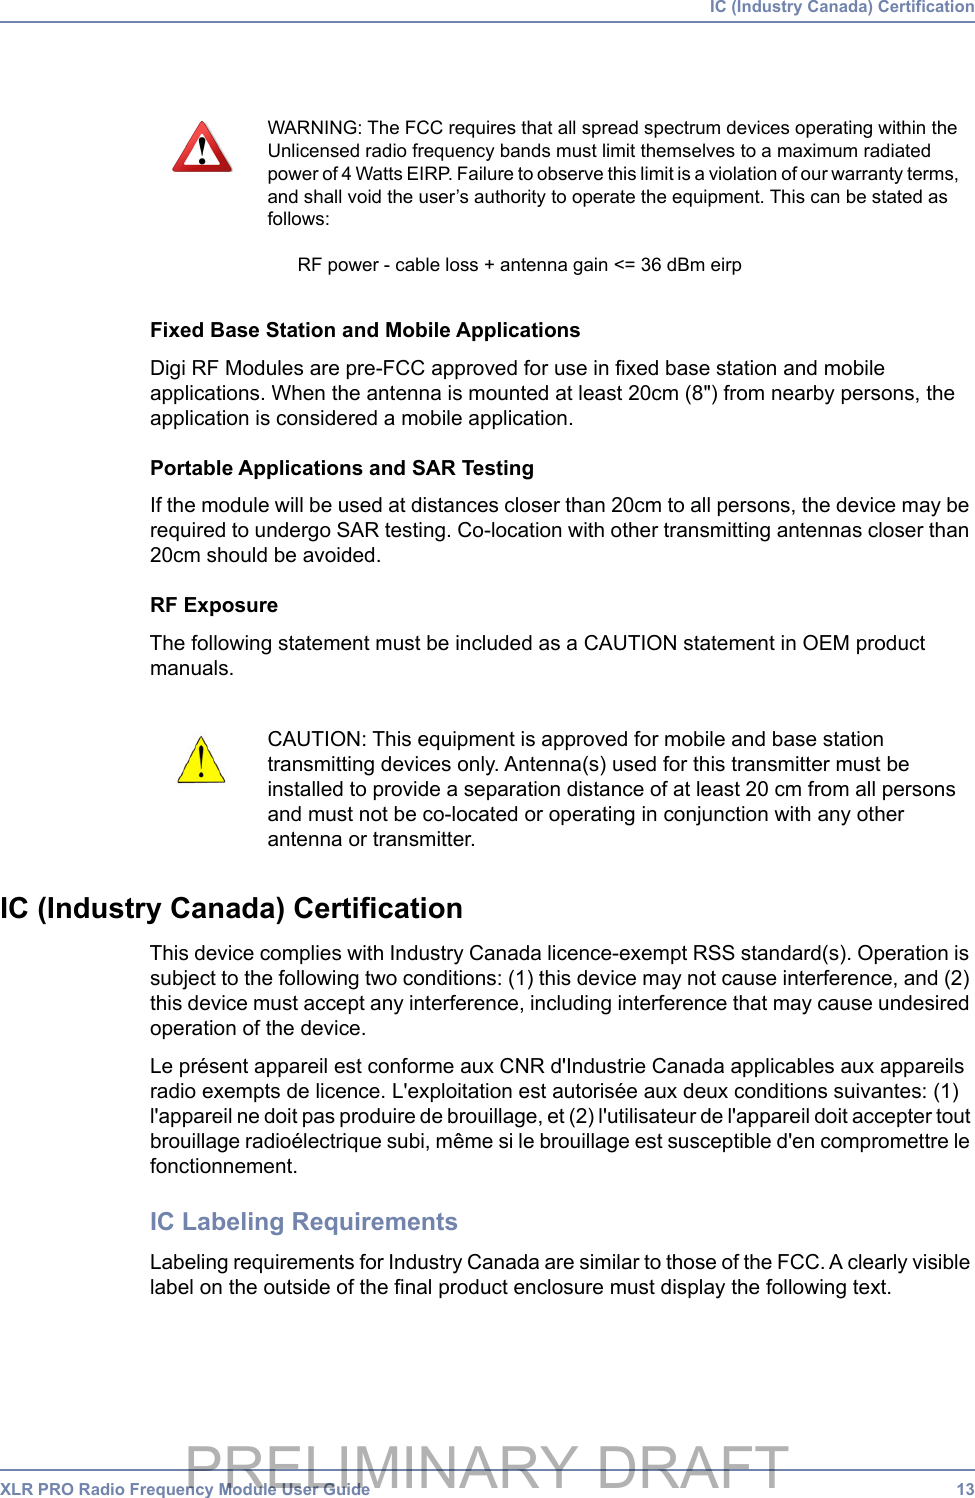 XLR PRO Radio Frequency Module User Guide 13 IC (Industry Canada) CertificationFixed Base Station and Mobile ApplicationsDigi RF Modules are pre-FCC approved for use in fixed base station and mobile applications. When the antenna is mounted at least 20cm (8&quot;) from nearby persons, the application is considered a mobile application.Portable Applications and SAR TestingIf the module will be used at distances closer than 20cm to all persons, the device may be required to undergo SAR testing. Co-location with other transmitting antennas closer than 20cm should be avoided.RF ExposureThe following statement must be included as a CAUTION statement in OEM product manuals.IC (Industry Canada) CertificationThis device complies with Industry Canada licence-exempt RSS standard(s). Operation is subject to the following two conditions: (1) this device may not cause interference, and (2) this device must accept any interference, including interference that may cause undesired operation of the device.Le présent appareil est conforme aux CNR d&apos;Industrie Canada applicables aux appareils radio exempts de licence. L&apos;exploitation est autorisée aux deux conditions suivantes: (1) l&apos;appareil ne doit pas produire de brouillage, et (2) l&apos;utilisateur de l&apos;appareil doit accepter tout brouillage radioélectrique subi, même si le brouillage est susceptible d&apos;en compromettre le fonctionnement.IC Labeling RequirementsLabeling requirements for Industry Canada are similar to those of the FCC. A clearly visible label on the outside of the final product enclosure must display the following text.WARNING: The FCC requires that all spread spectrum devices operating within the Unlicensed radio frequency bands must limit themselves to a maximum radiated power of 4 Watts EIRP. Failure to observe this limit is a violation of our warranty terms, and shall void the user’s authority to operate the equipment. This can be stated as follows:RF power - cable loss + antenna gain &lt;= 36 dBm eirpCAUTION: This equipment is approved for mobile and base station transmitting devices only. Antenna(s) used for this transmitter must be installed to provide a separation distance of at least 20 cm from all persons and must not be co-located or operating in conjunction with any other antenna or transmitter.PRELIMINARY DRAFT